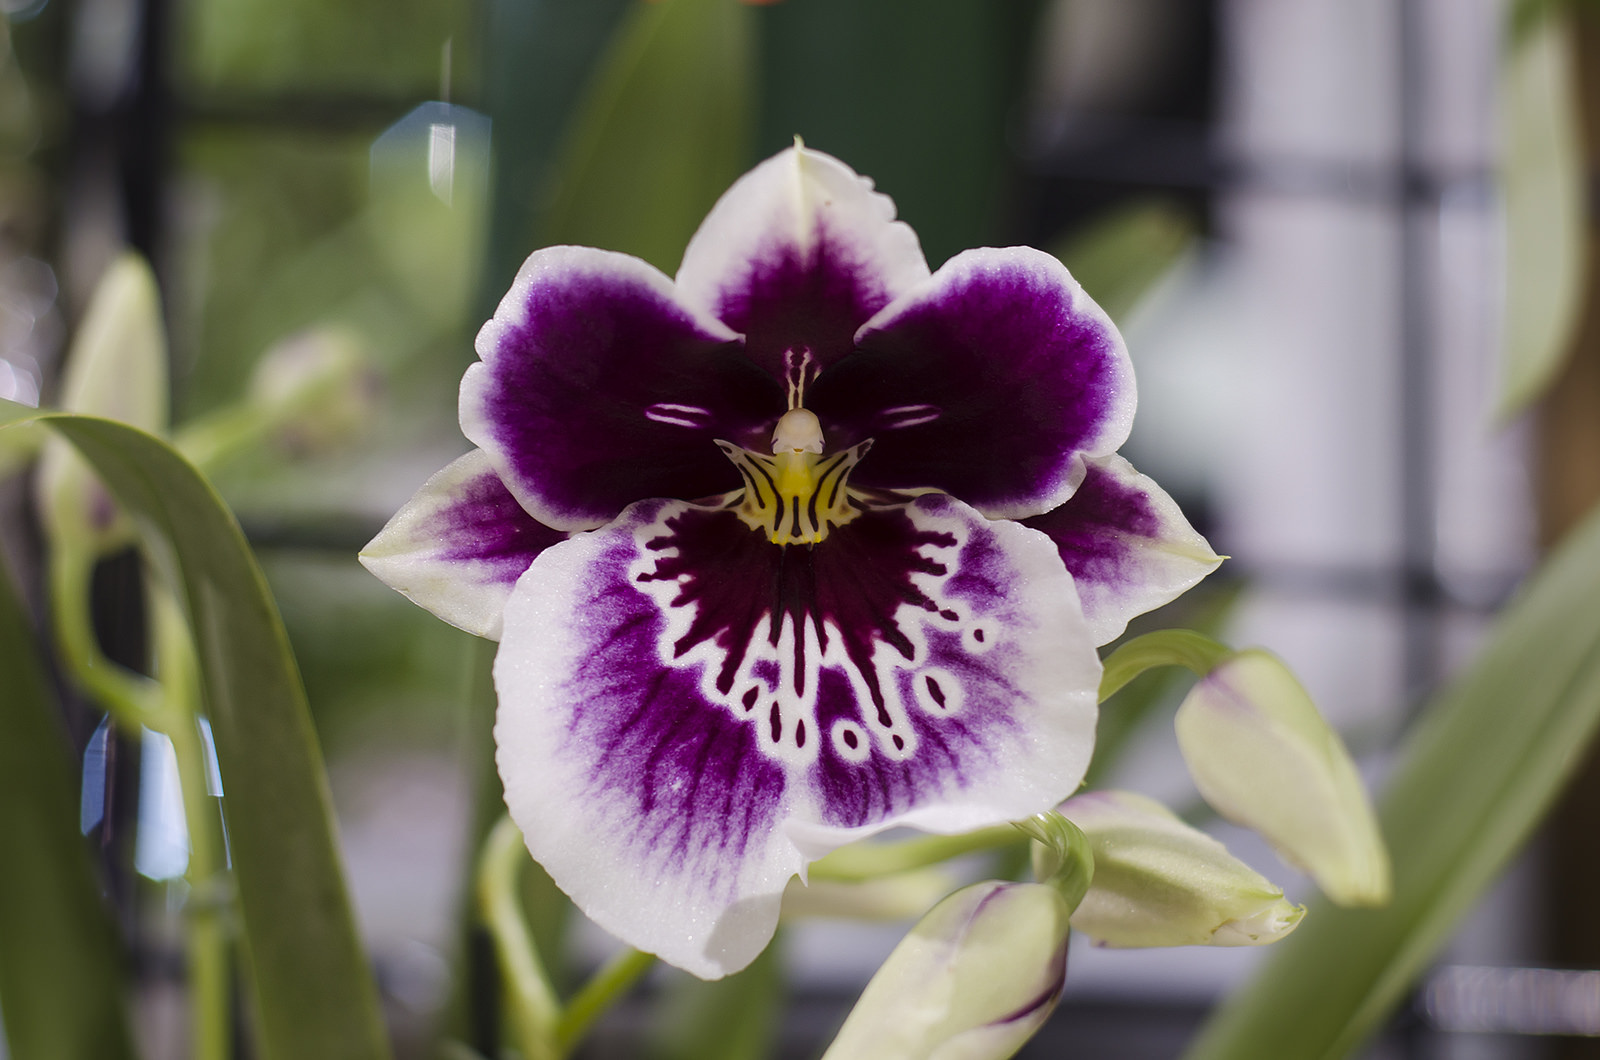 Orchid Image